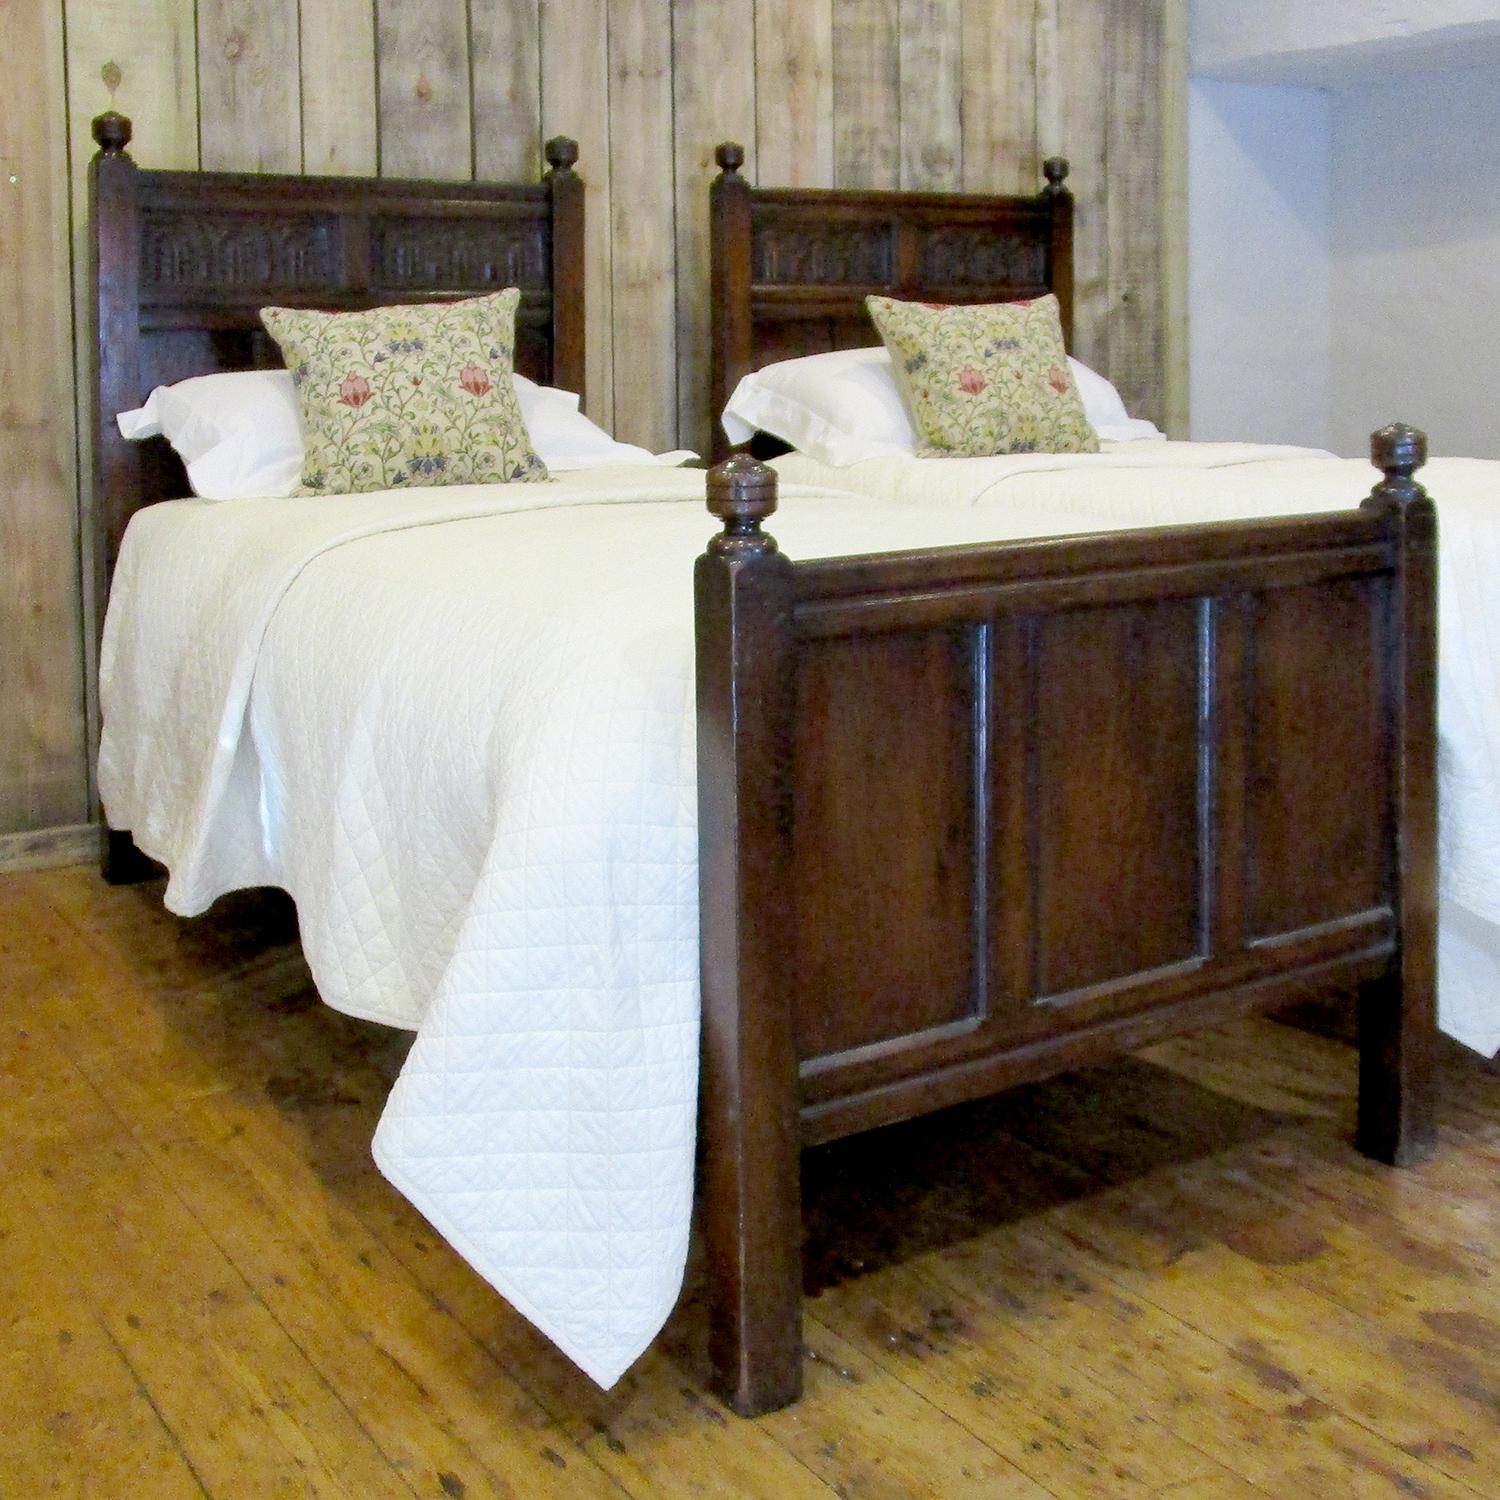 This matching pair of single beds in oak in the Jacobean style were fashioned in the early Twentieth century, circa 1920.

The pair accept standard single size bases and mattresses, 3ft wide by 6ft 3in long (91 cm x 190 cm).
The runners can be